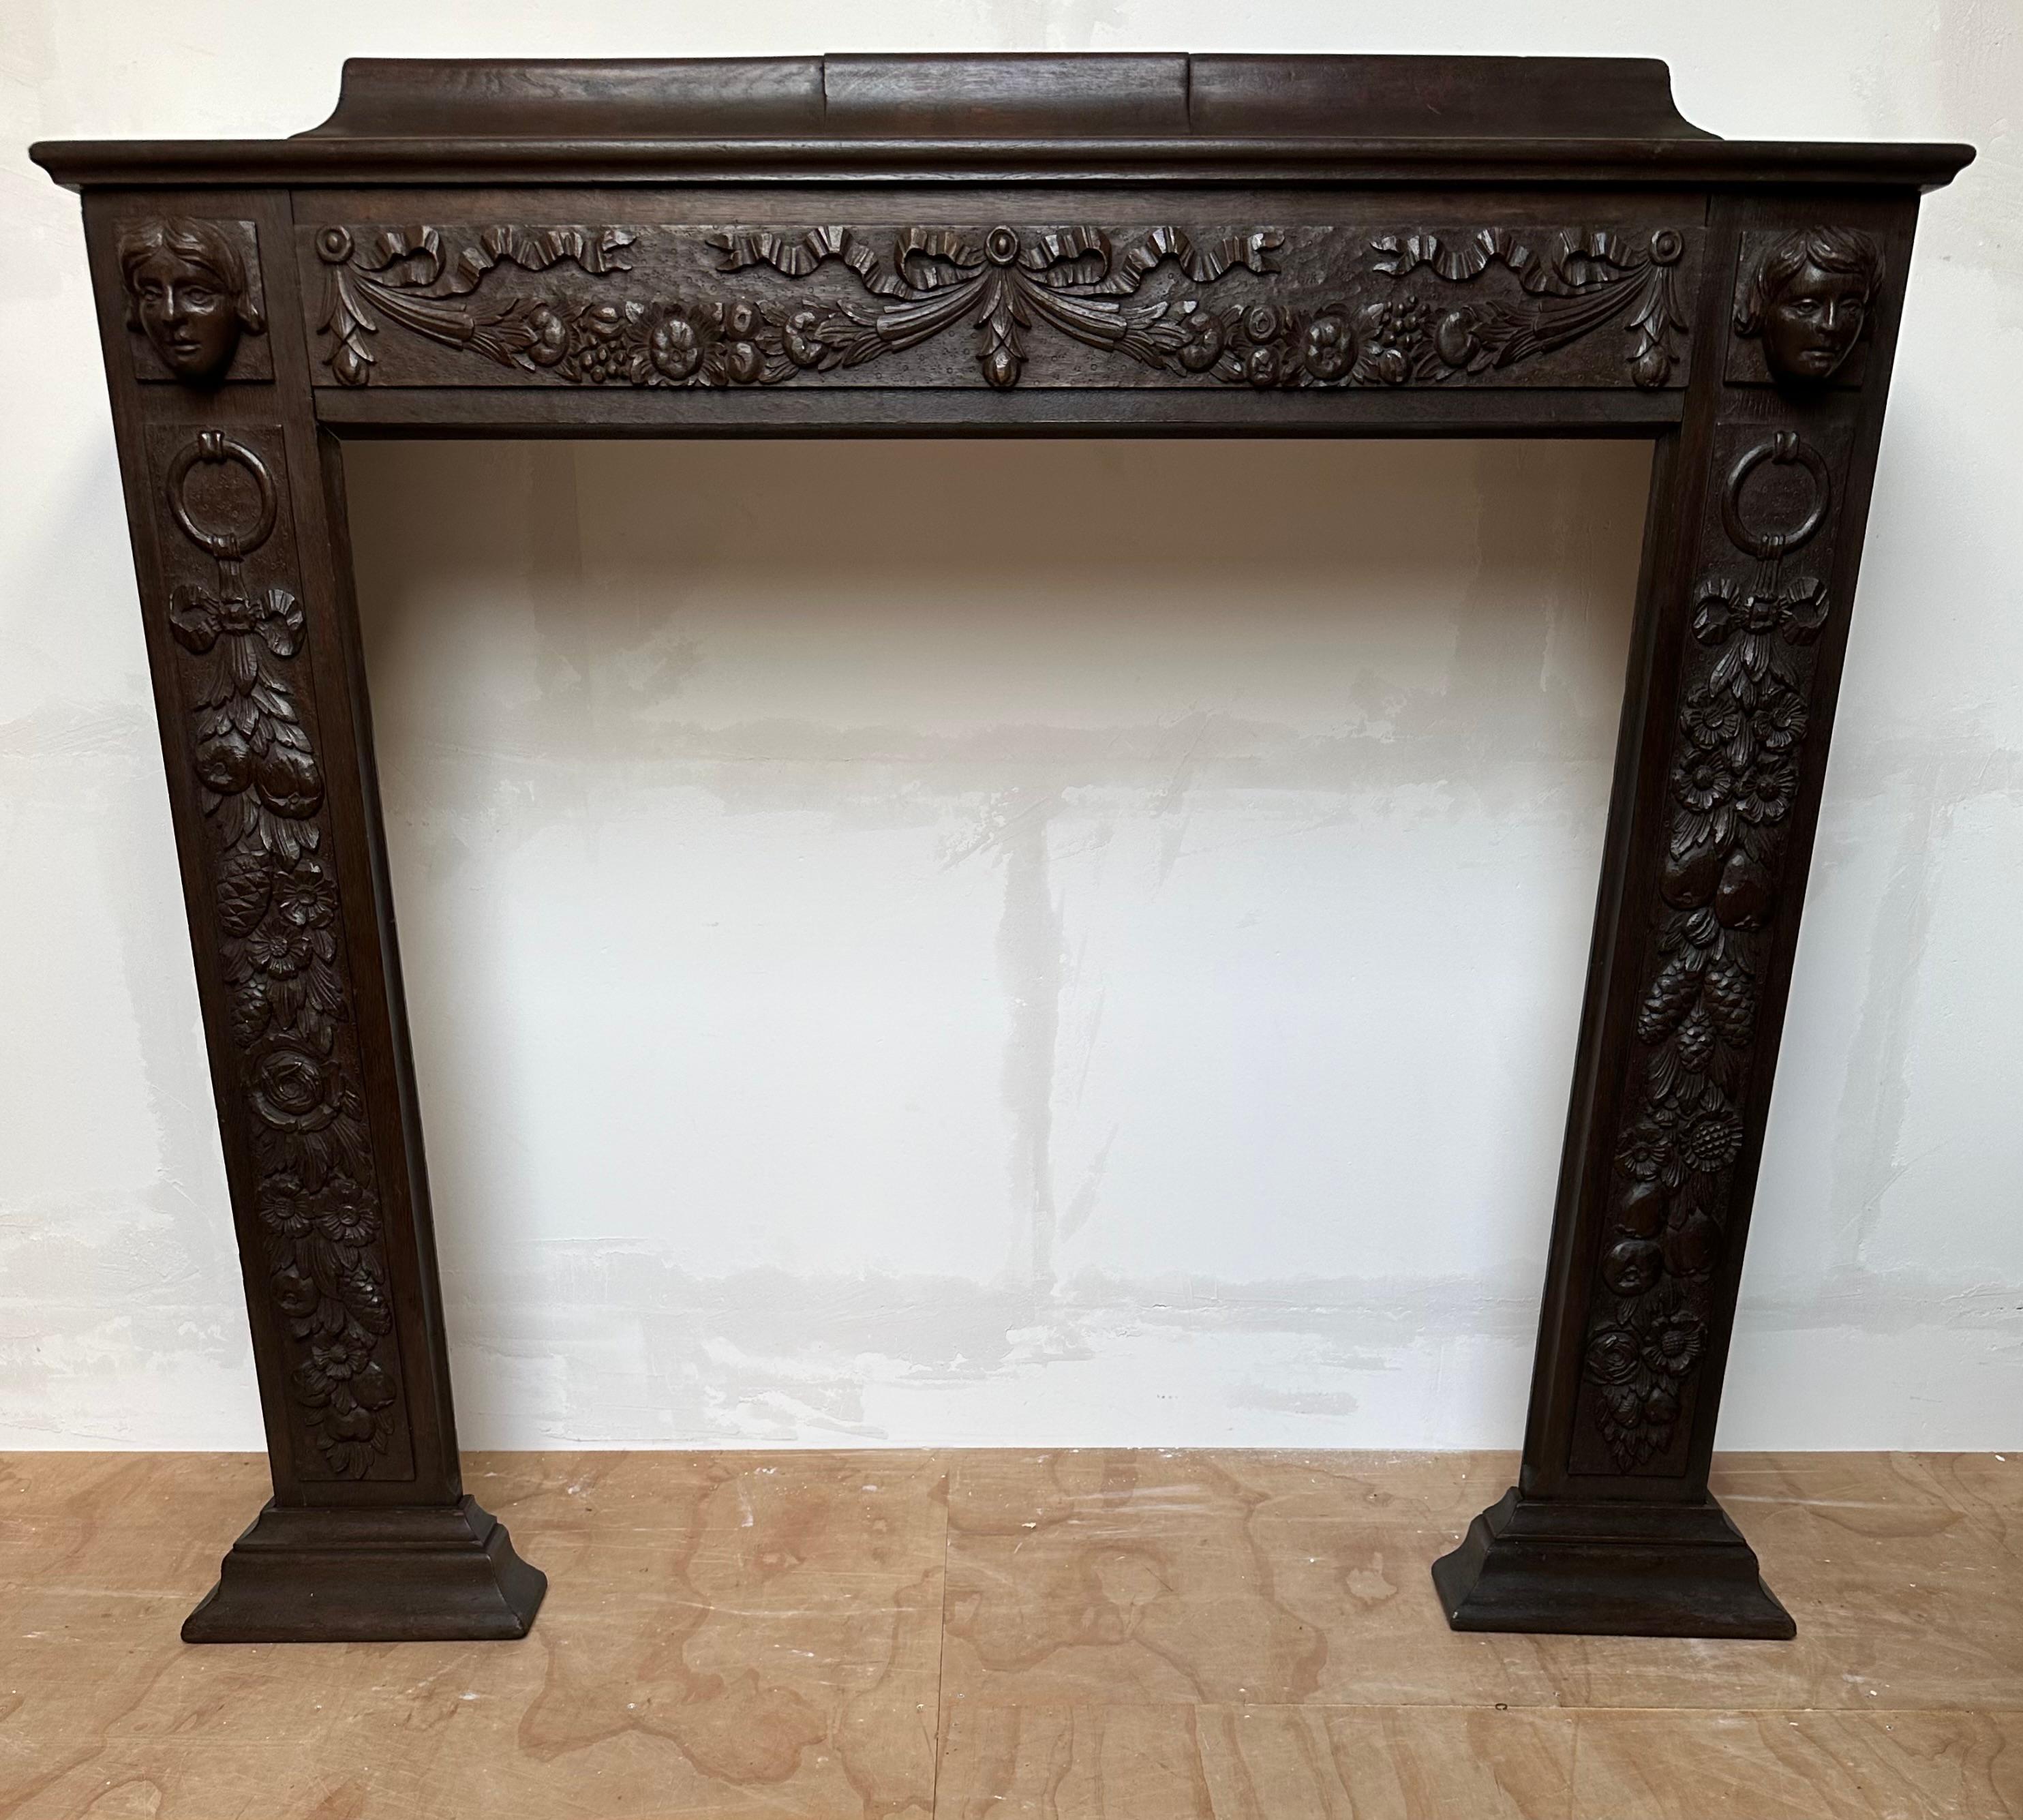 Rare Antique Hand Carved Oak Fireplace Mantel Surround w. Horns of Plenty & More For Sale 11